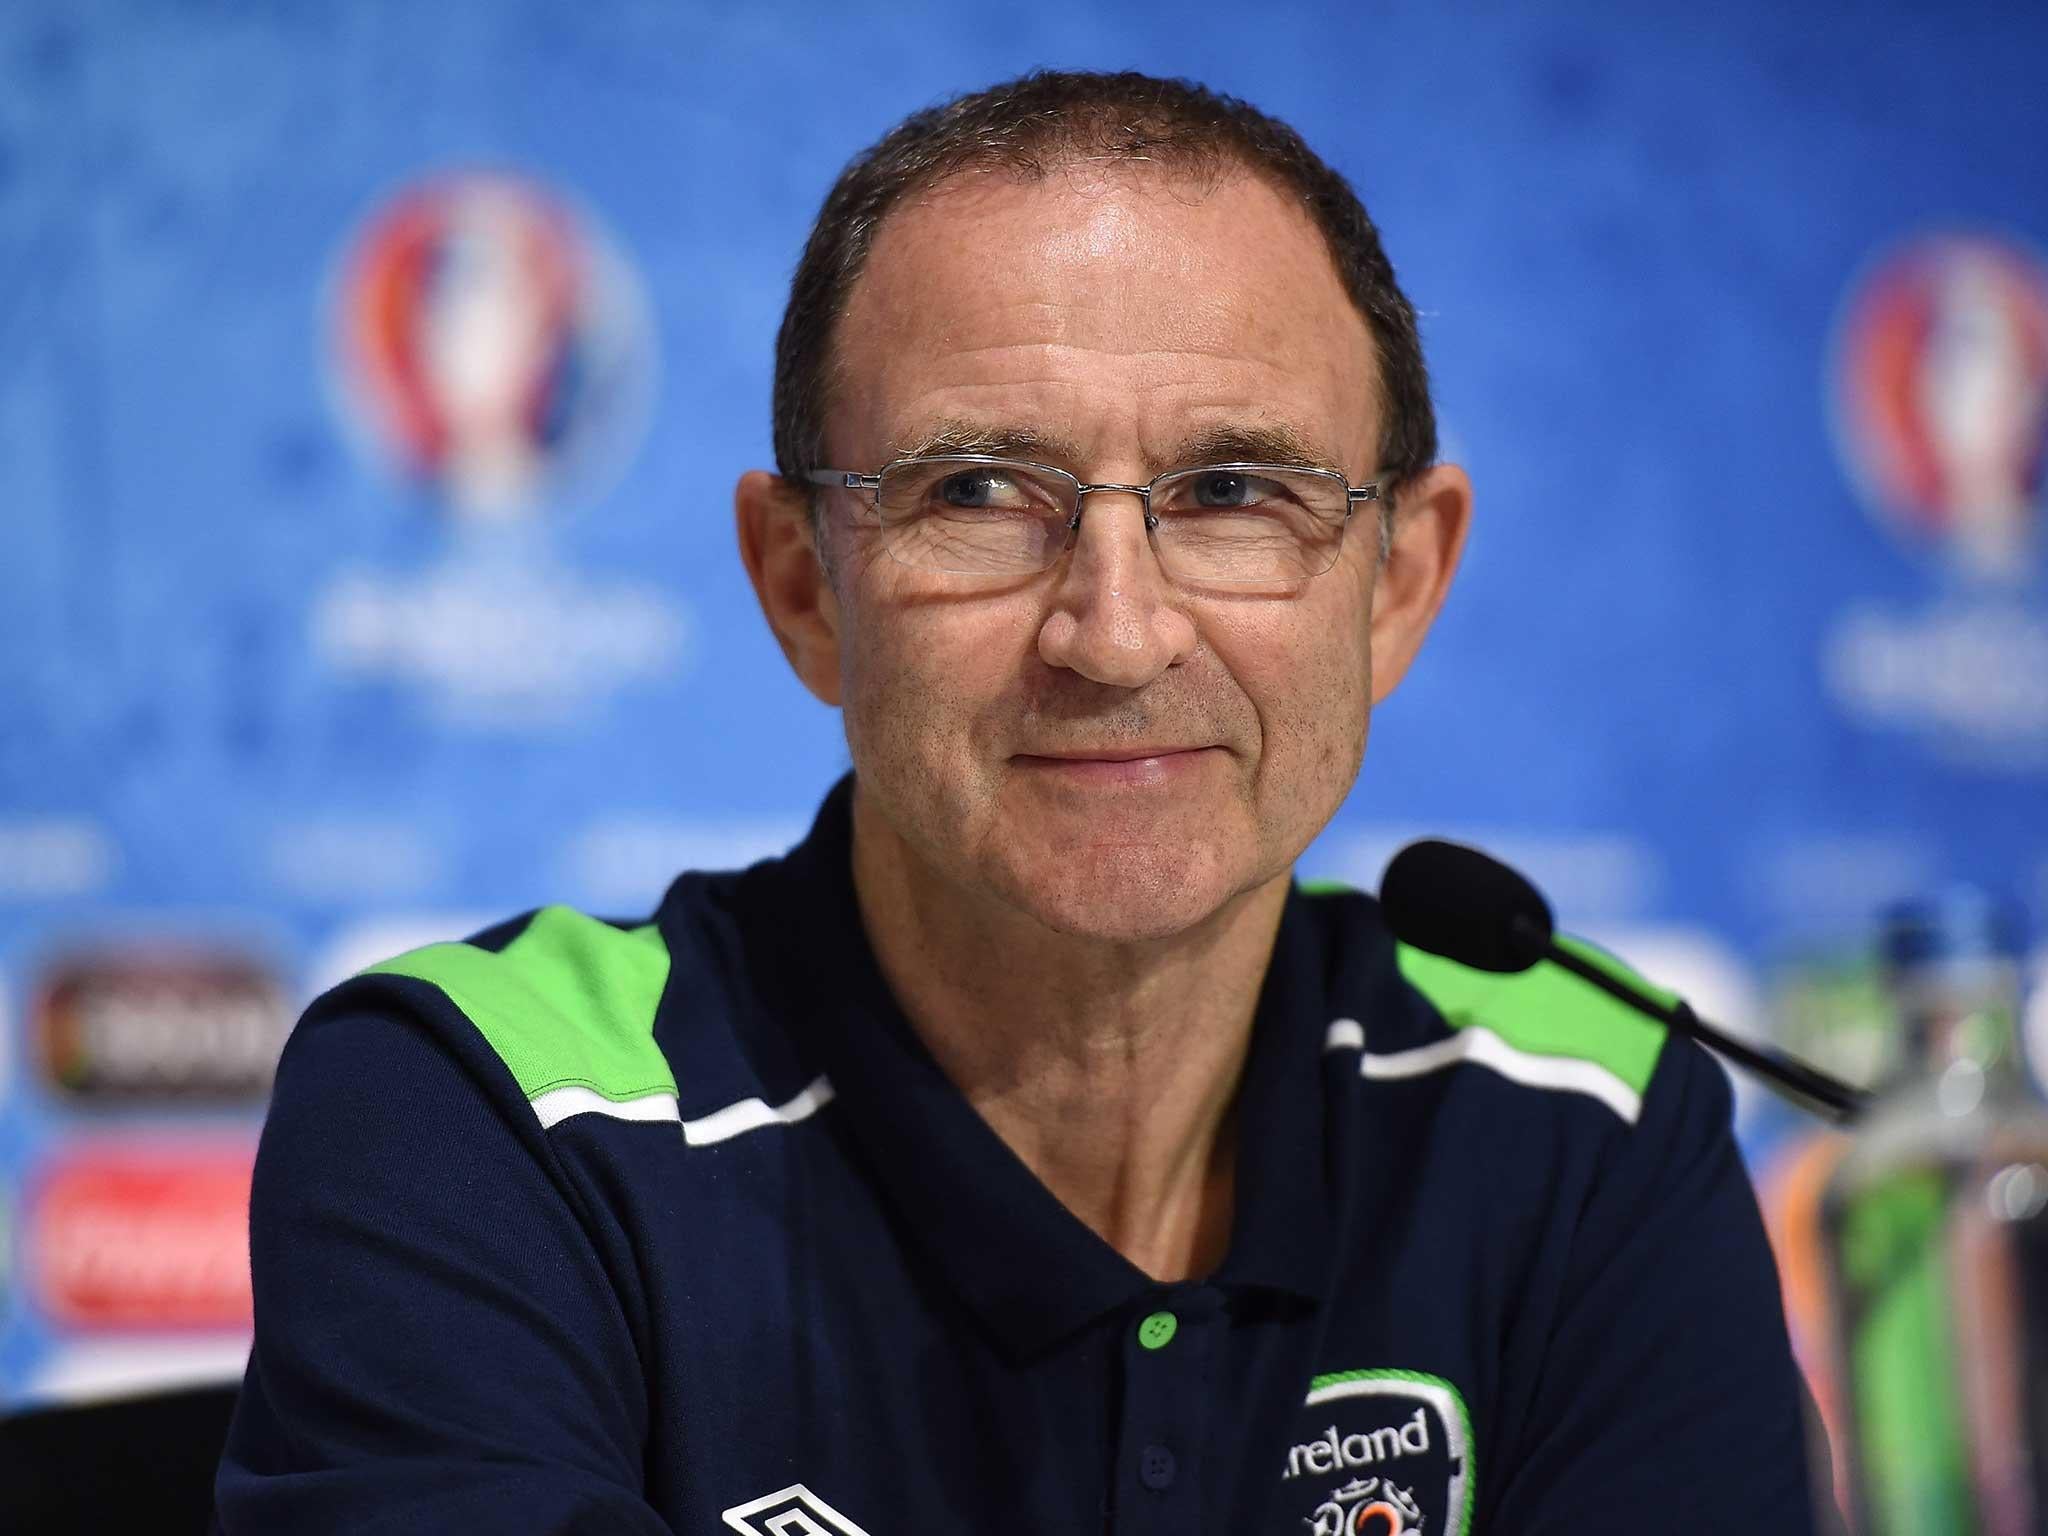 Martin O'Neill is on the cusp of history with the Republic of Ireland